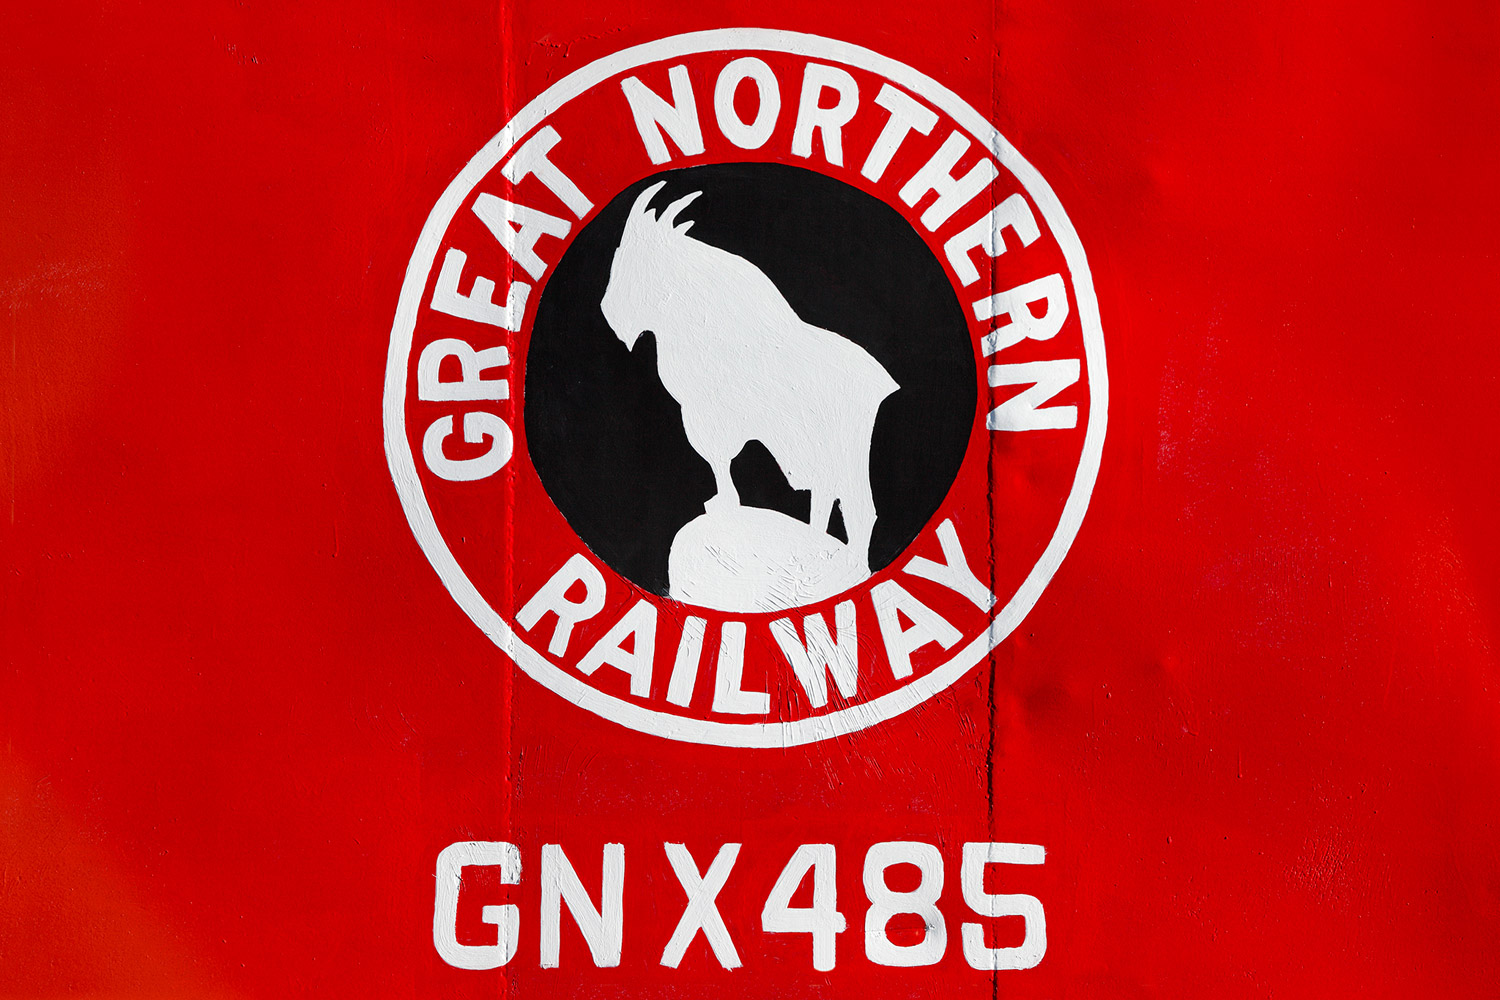 Great Northern Caboose